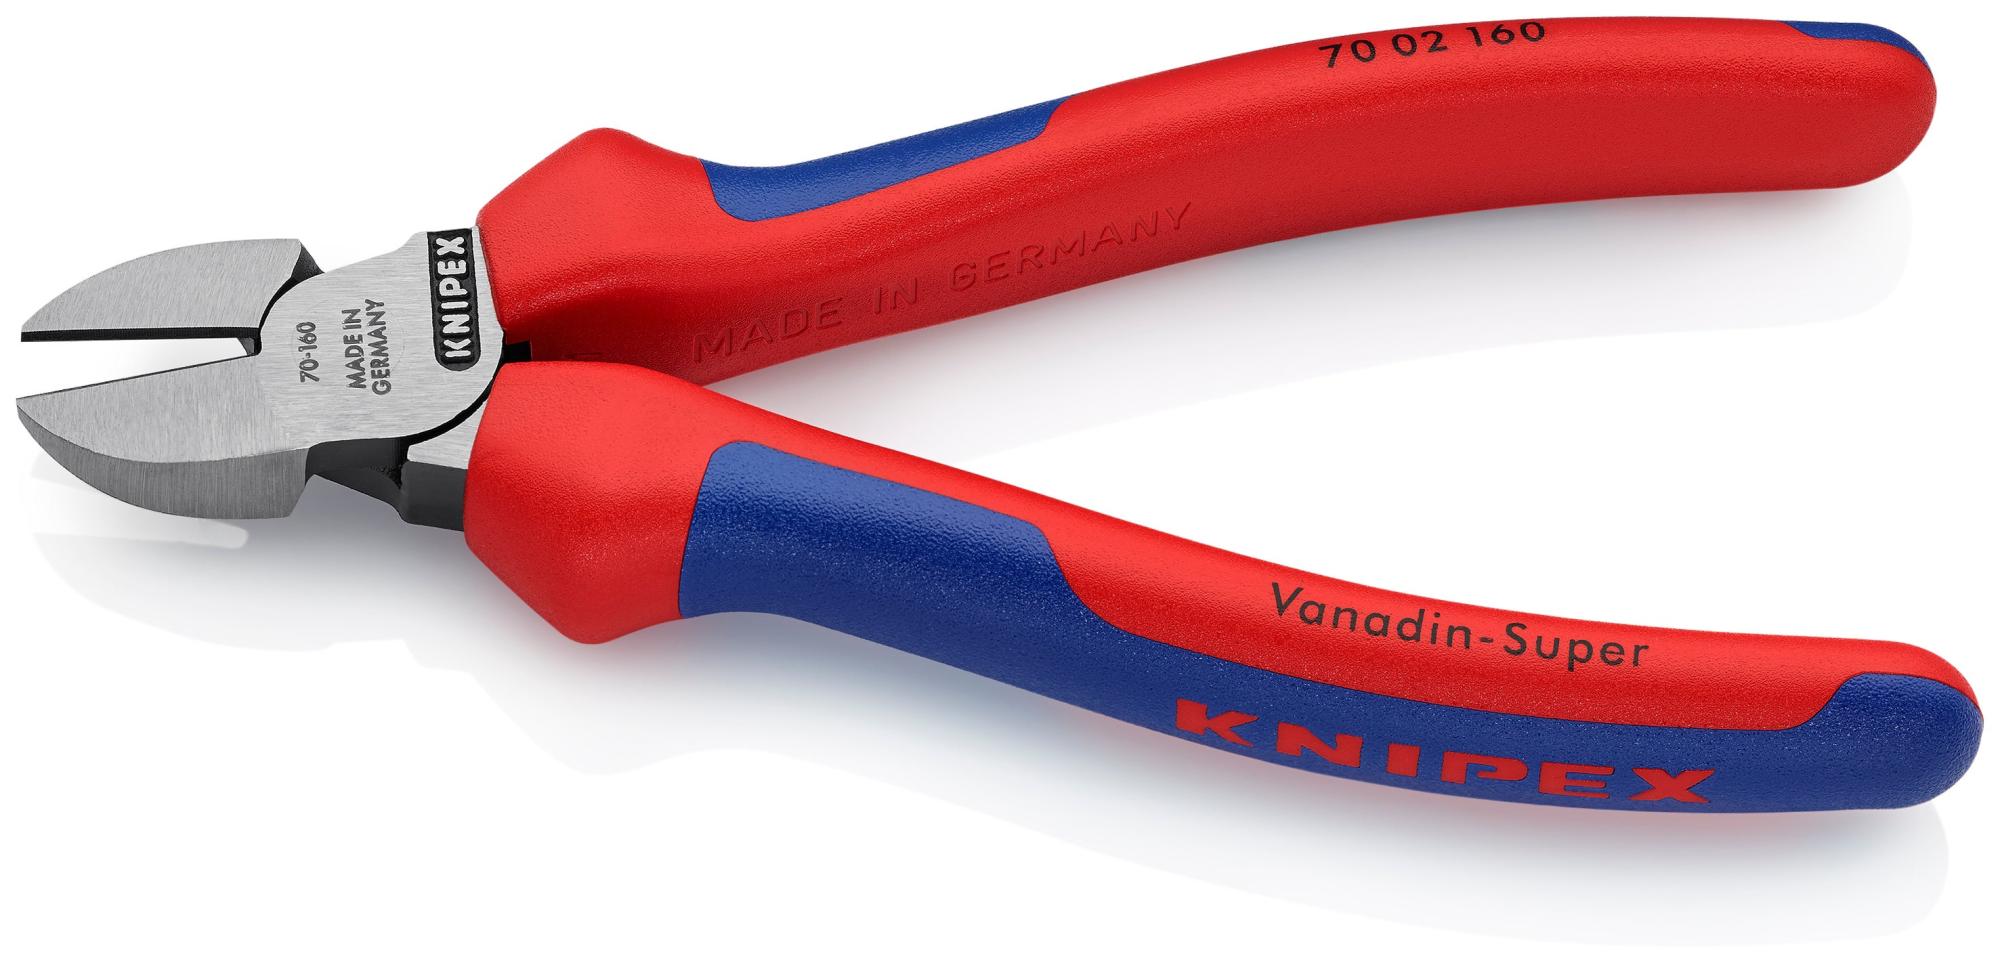 Pince coupante knipex